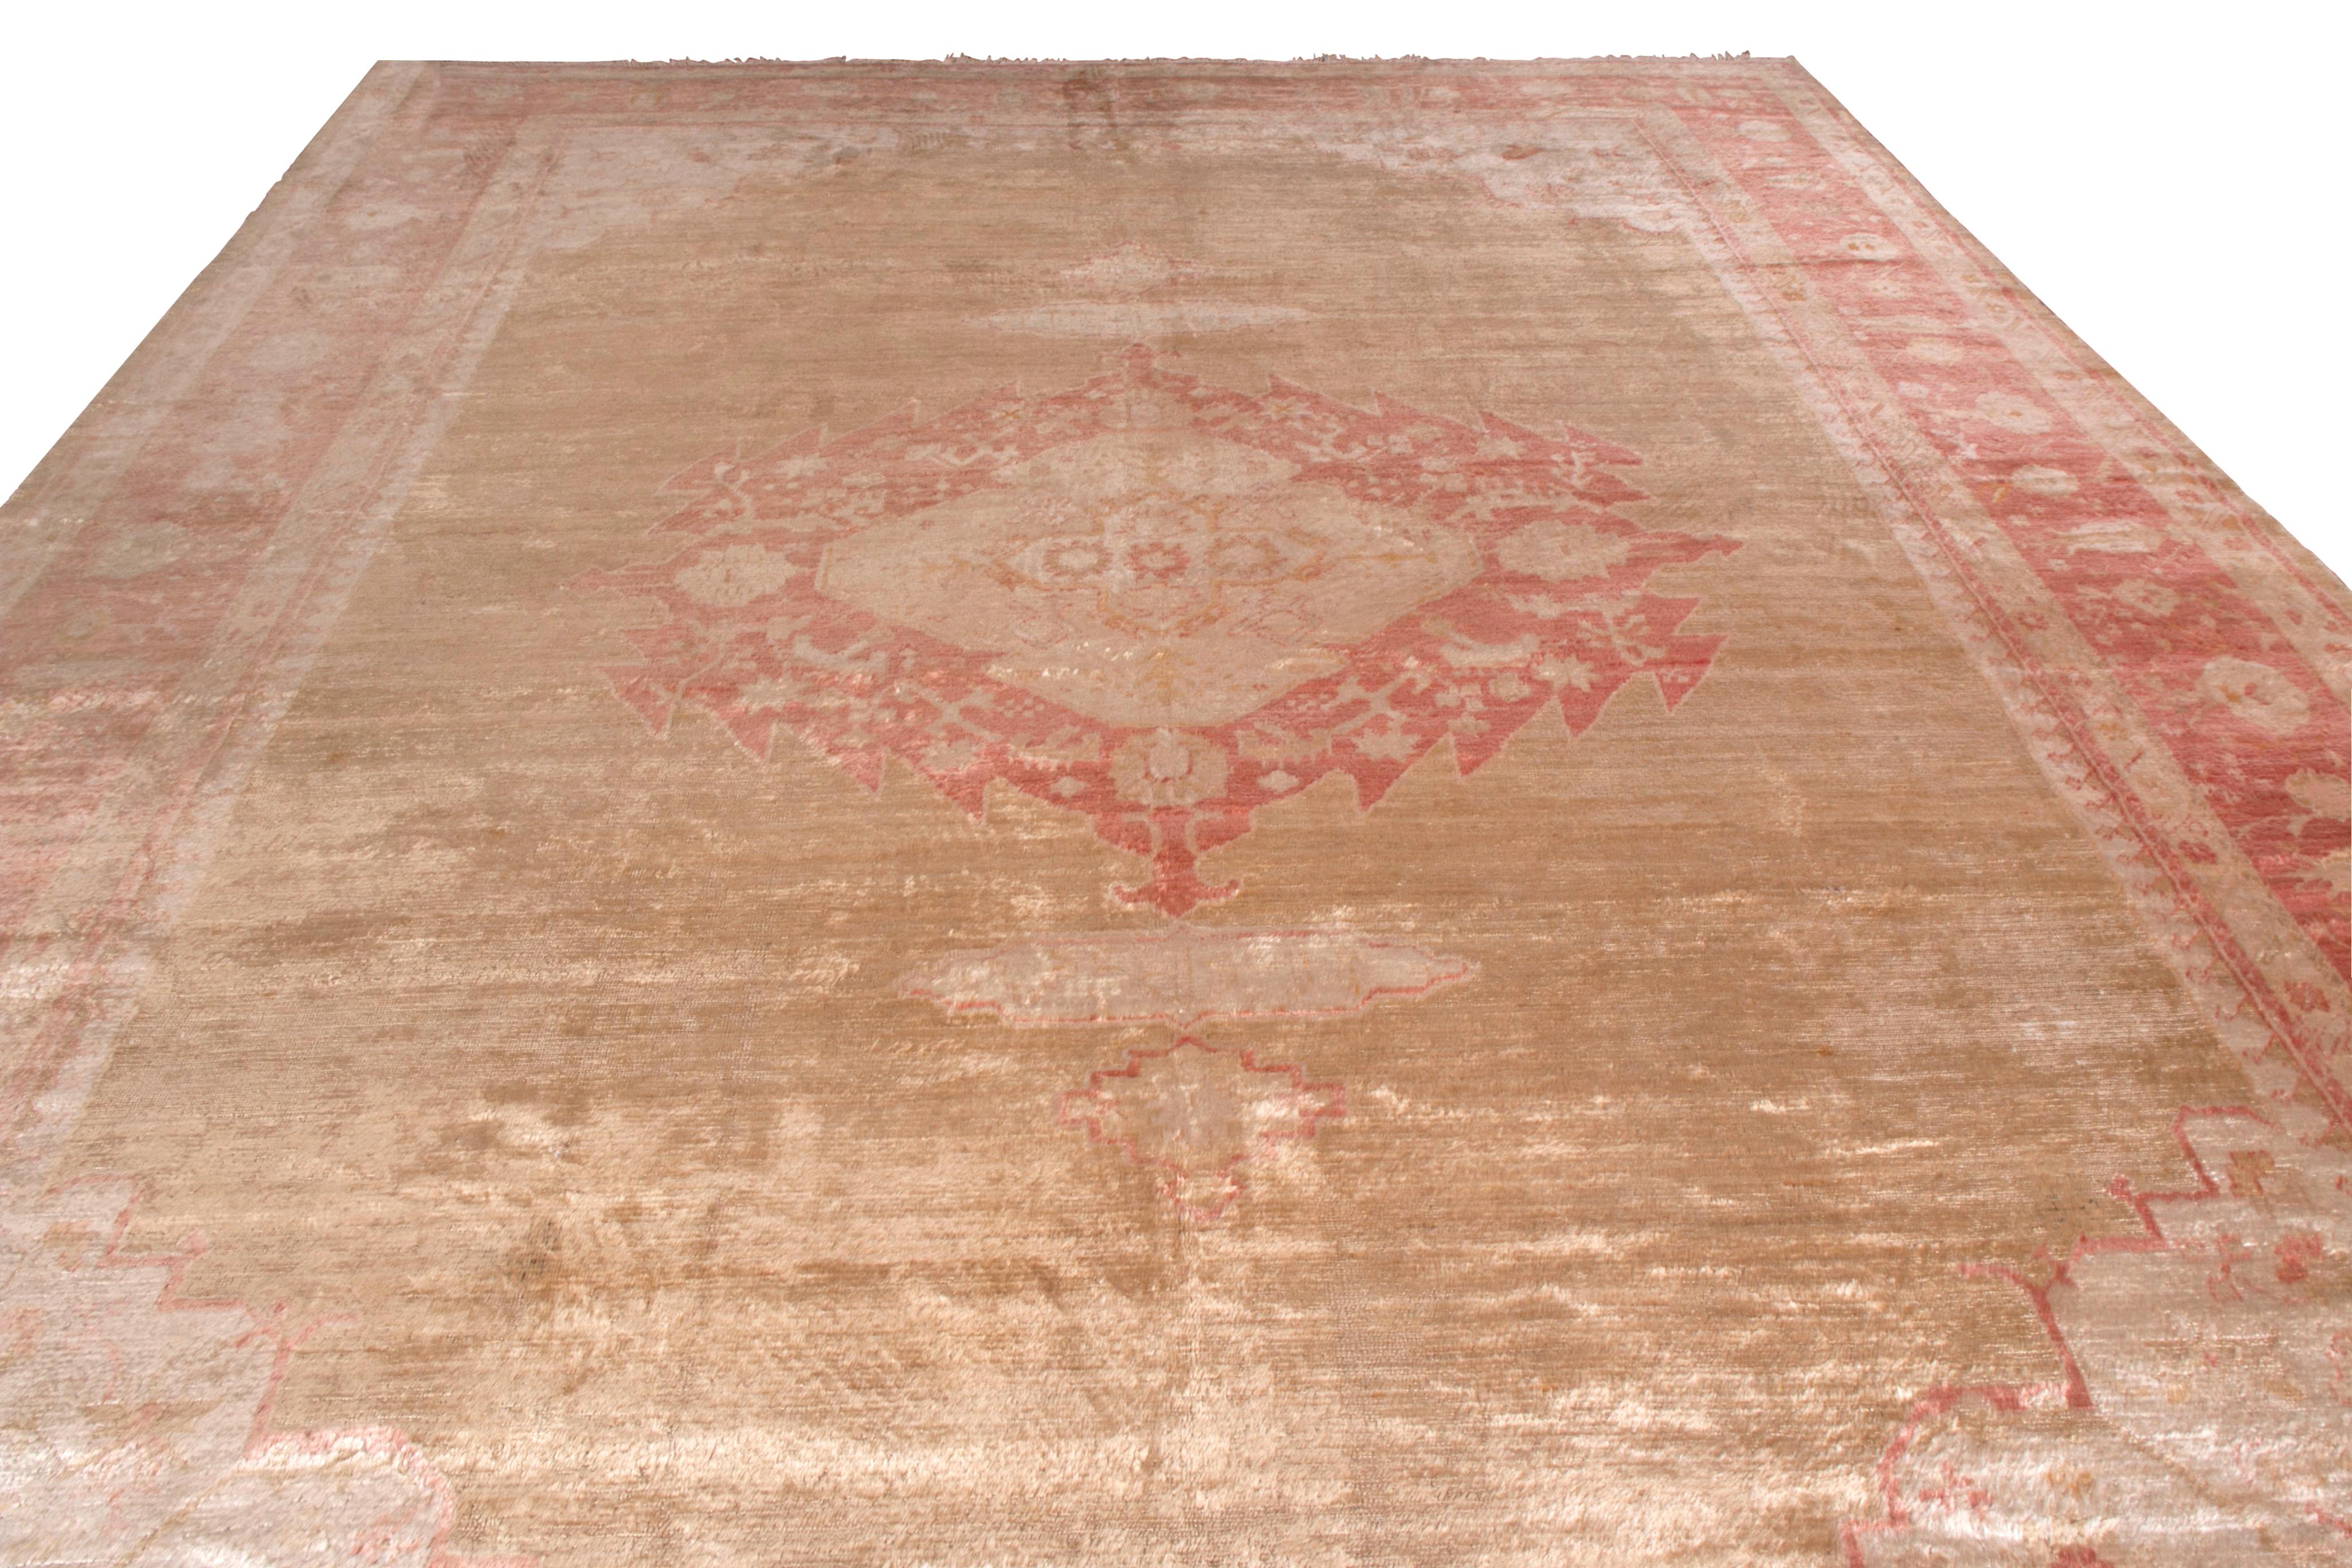 Hand knotted in notoriously sheen angora wool originating from Turkey between 1900-1910, this antique rug connotes an early 20th century medallion-style Oushak design in a rich traditional pallet of burnt red and beige-gold tones. The natural luster